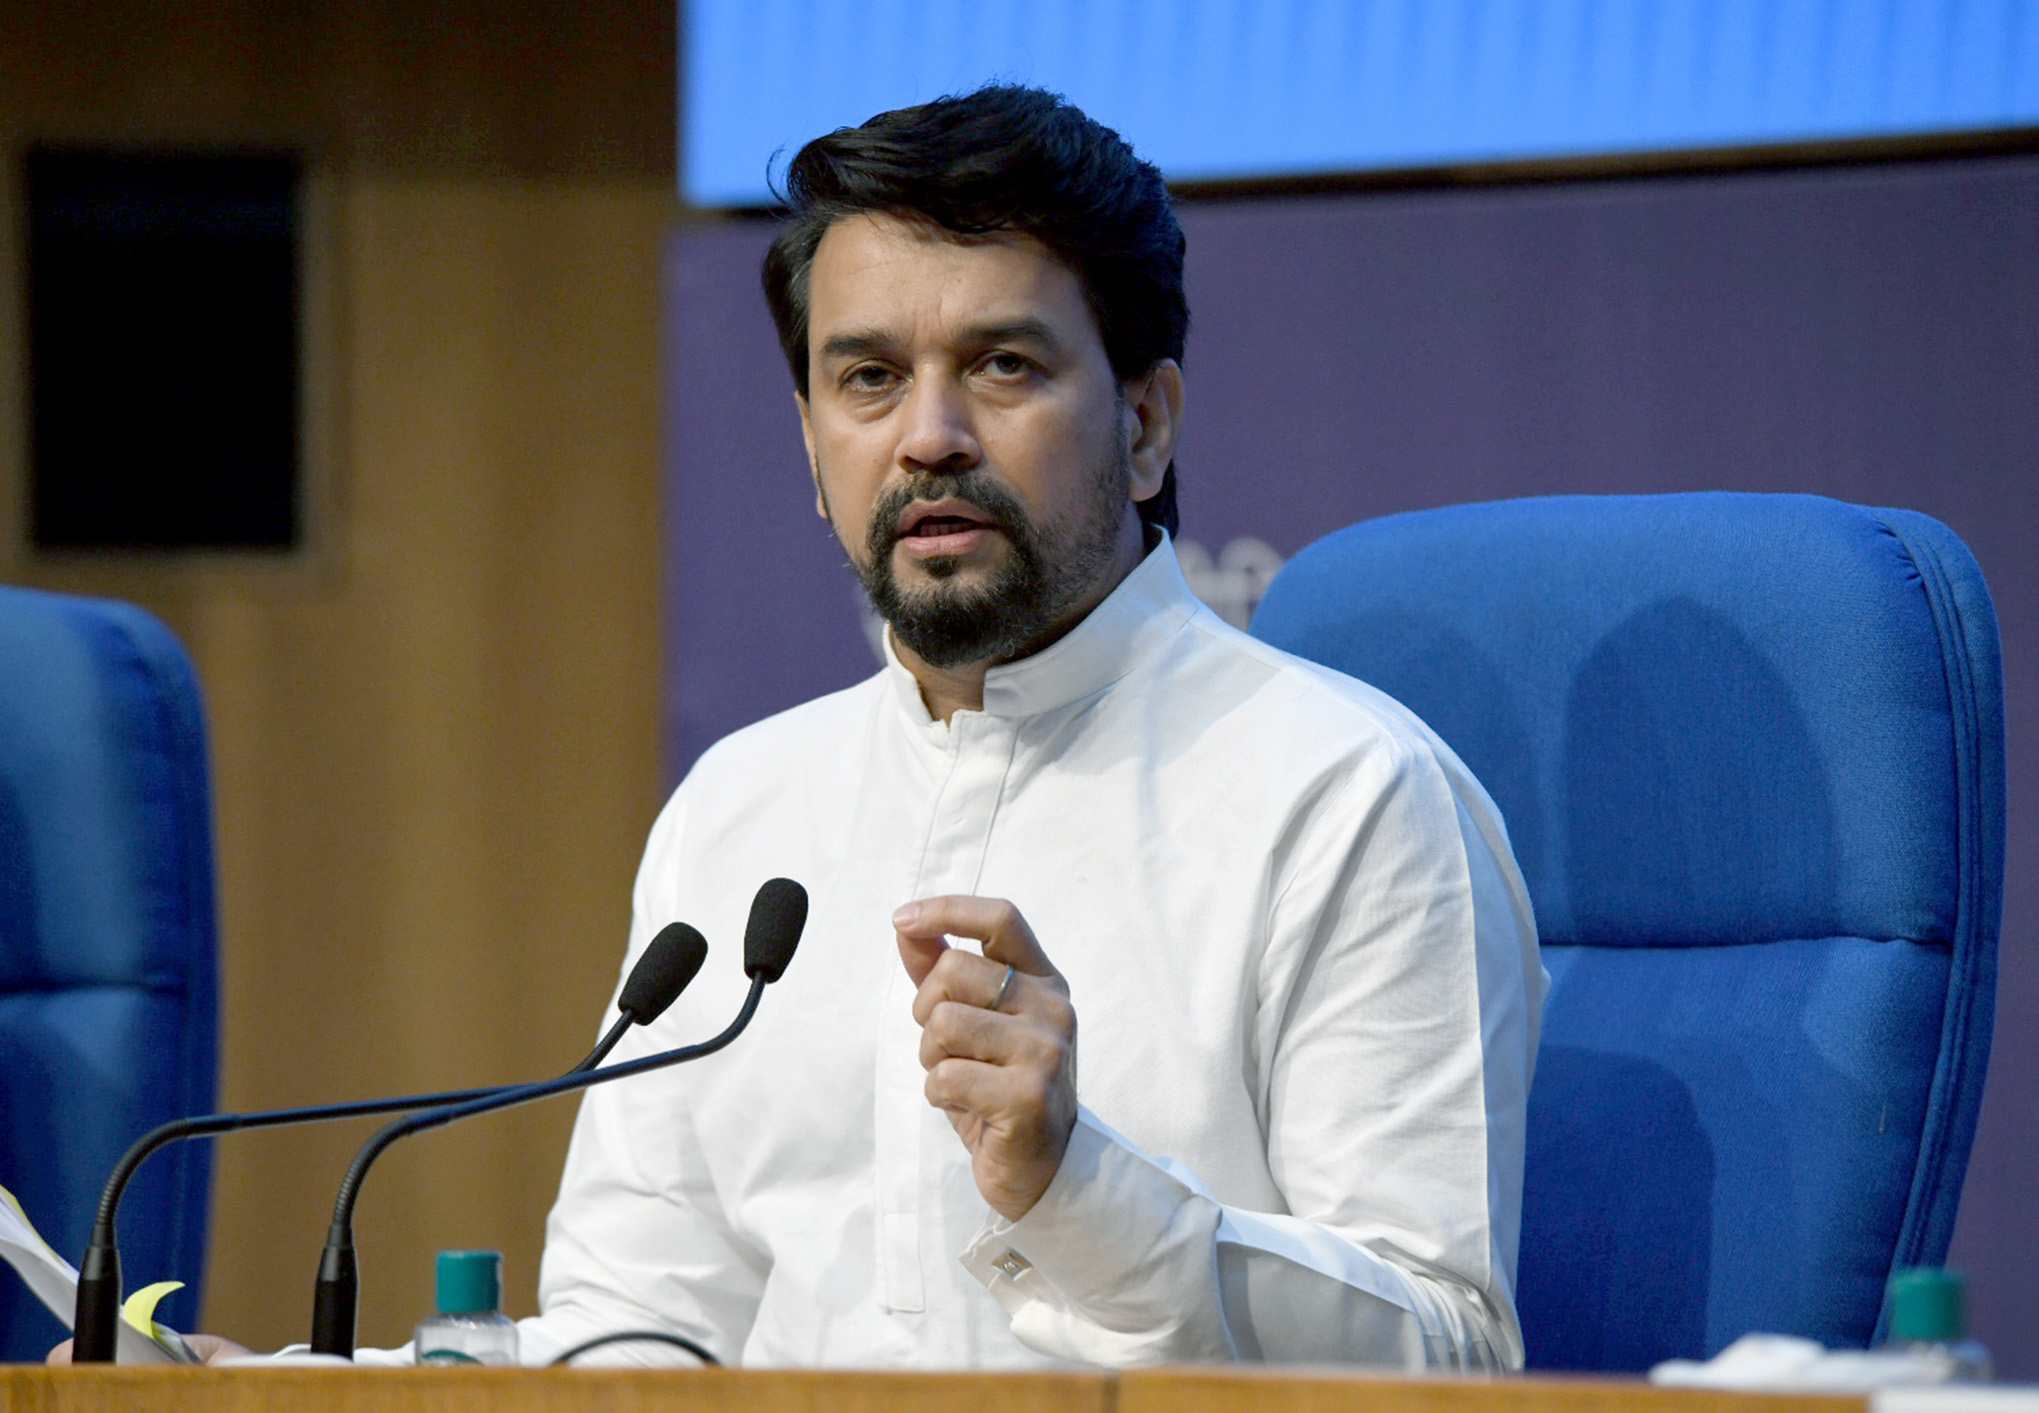 Rahul Gandhi Should Apologise to Parliament for Speaking Against India & Parliament: Anurag Thakur